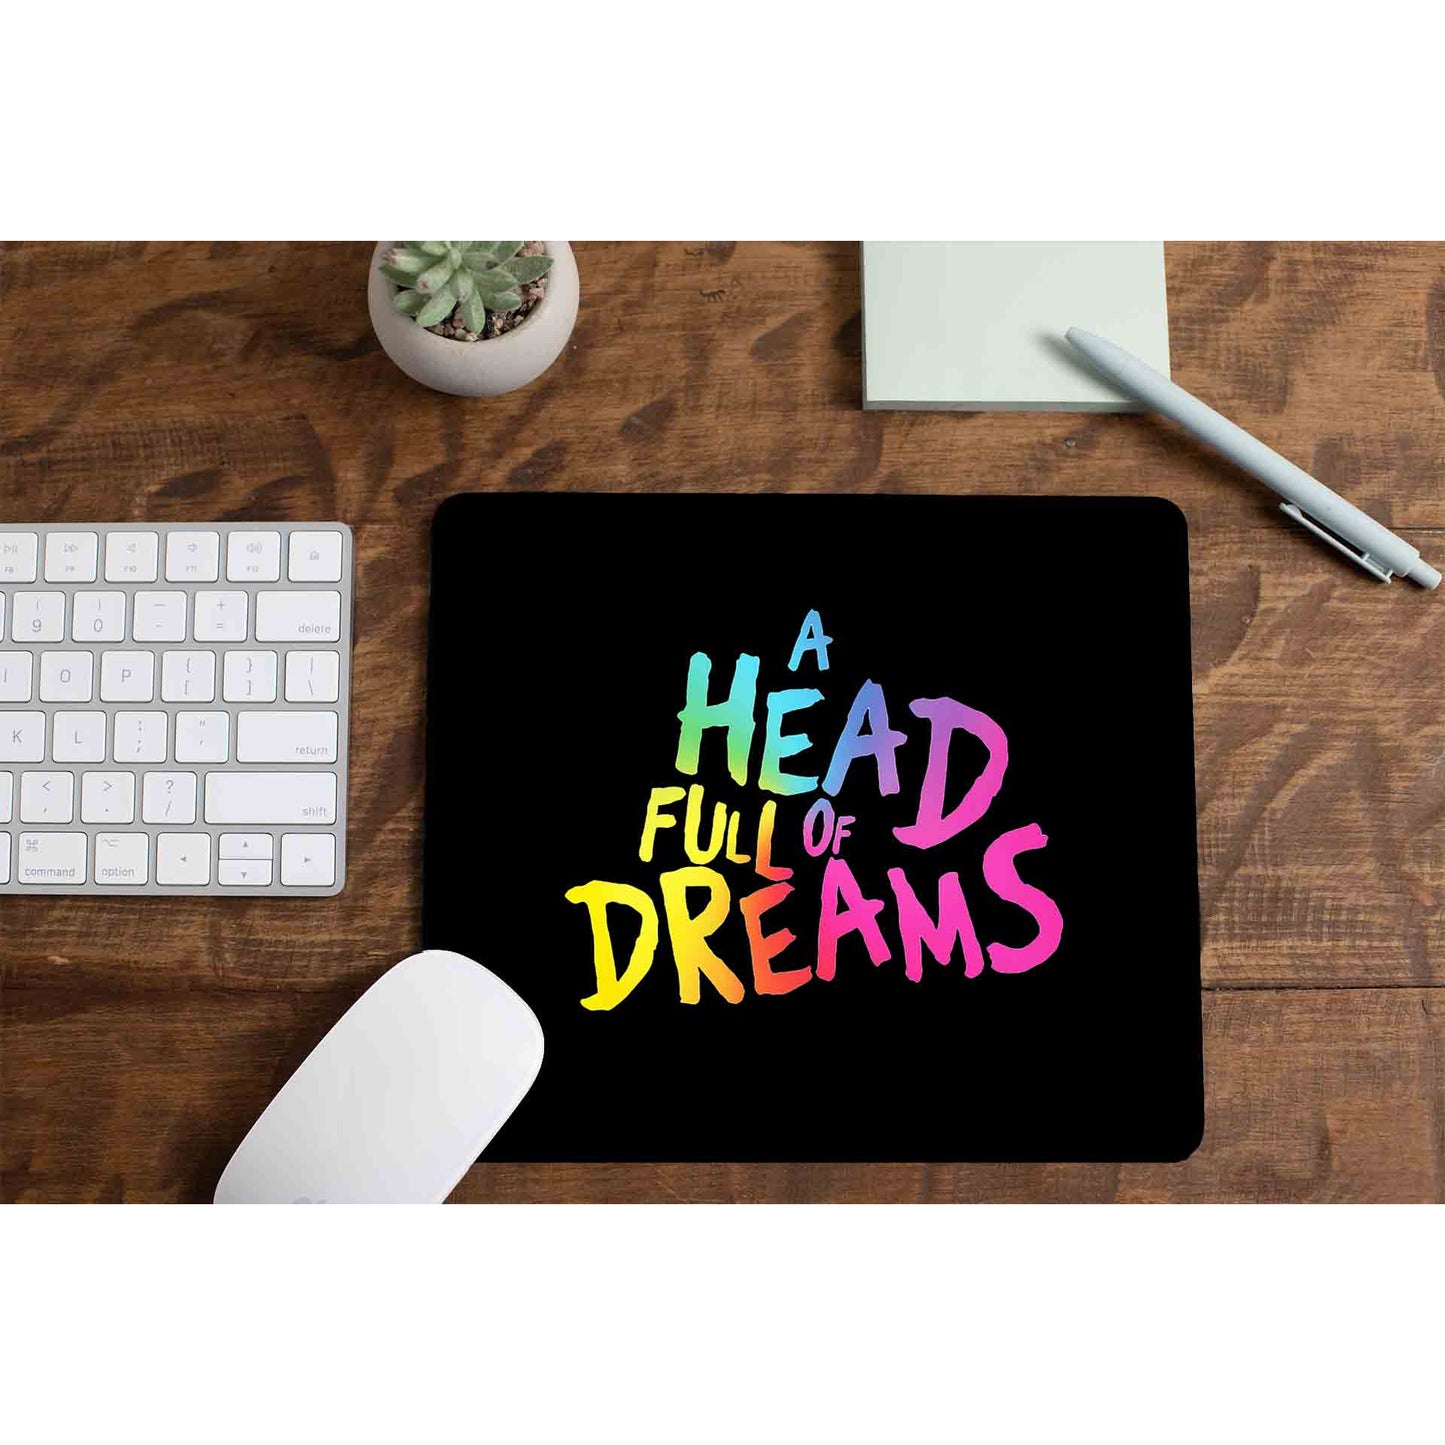 coldplay a head full of dreams mousepad logitech large anime music band buy online india the banyan tee tbt men women girls boys unisex